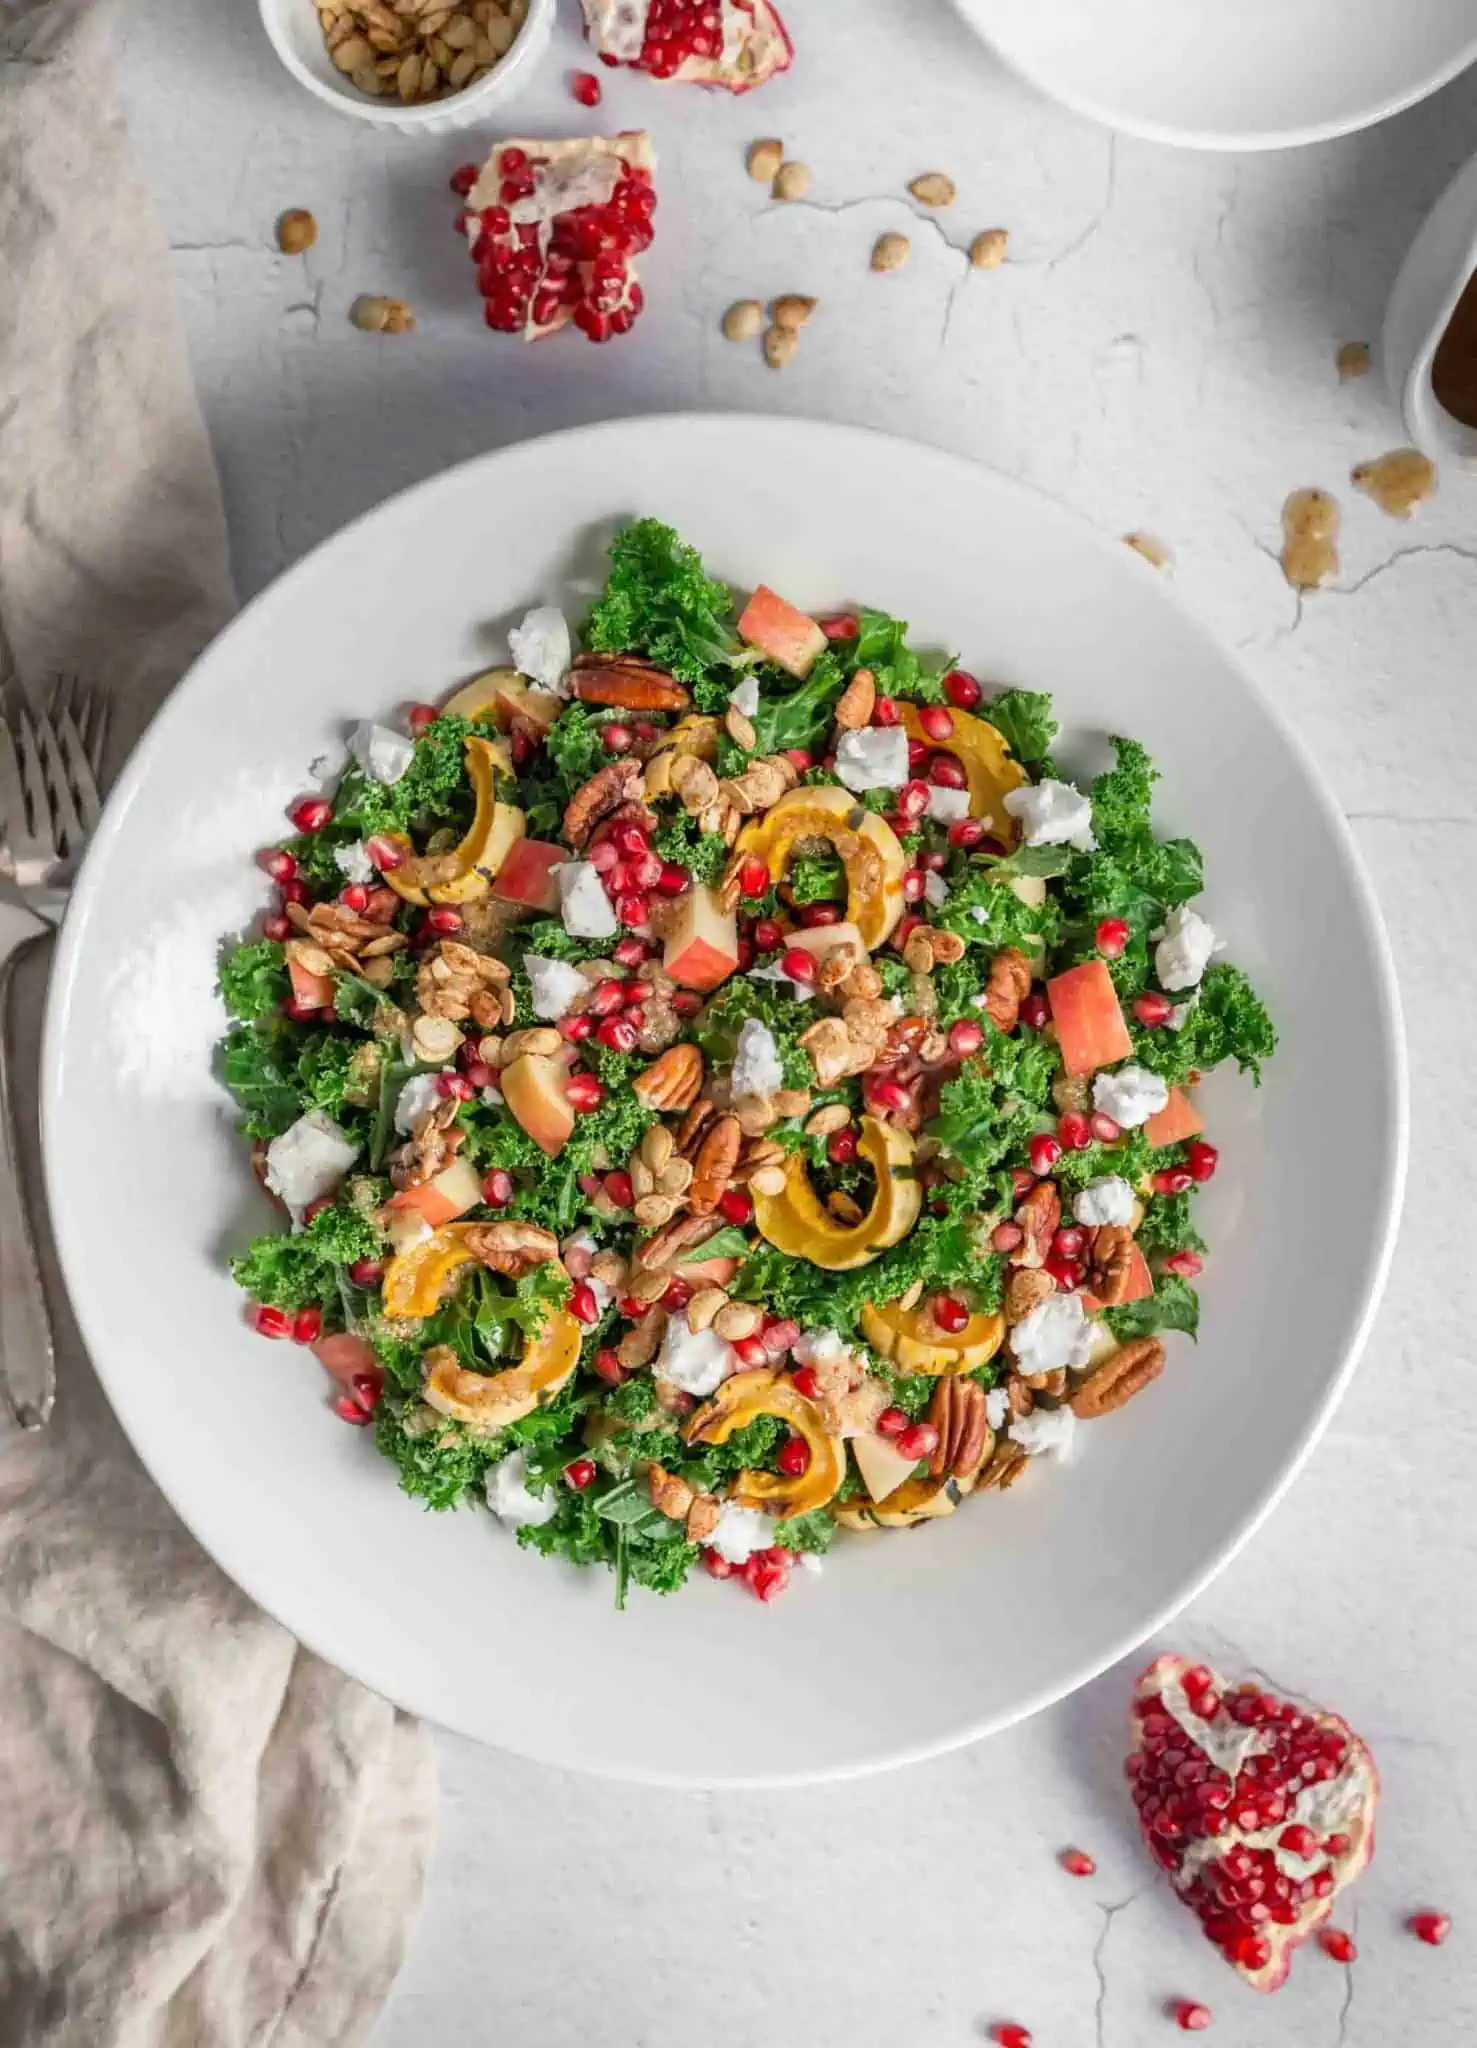 A delicata squash kale salad holiday dish with pomegranate seeds, vegan feta, and pecans.